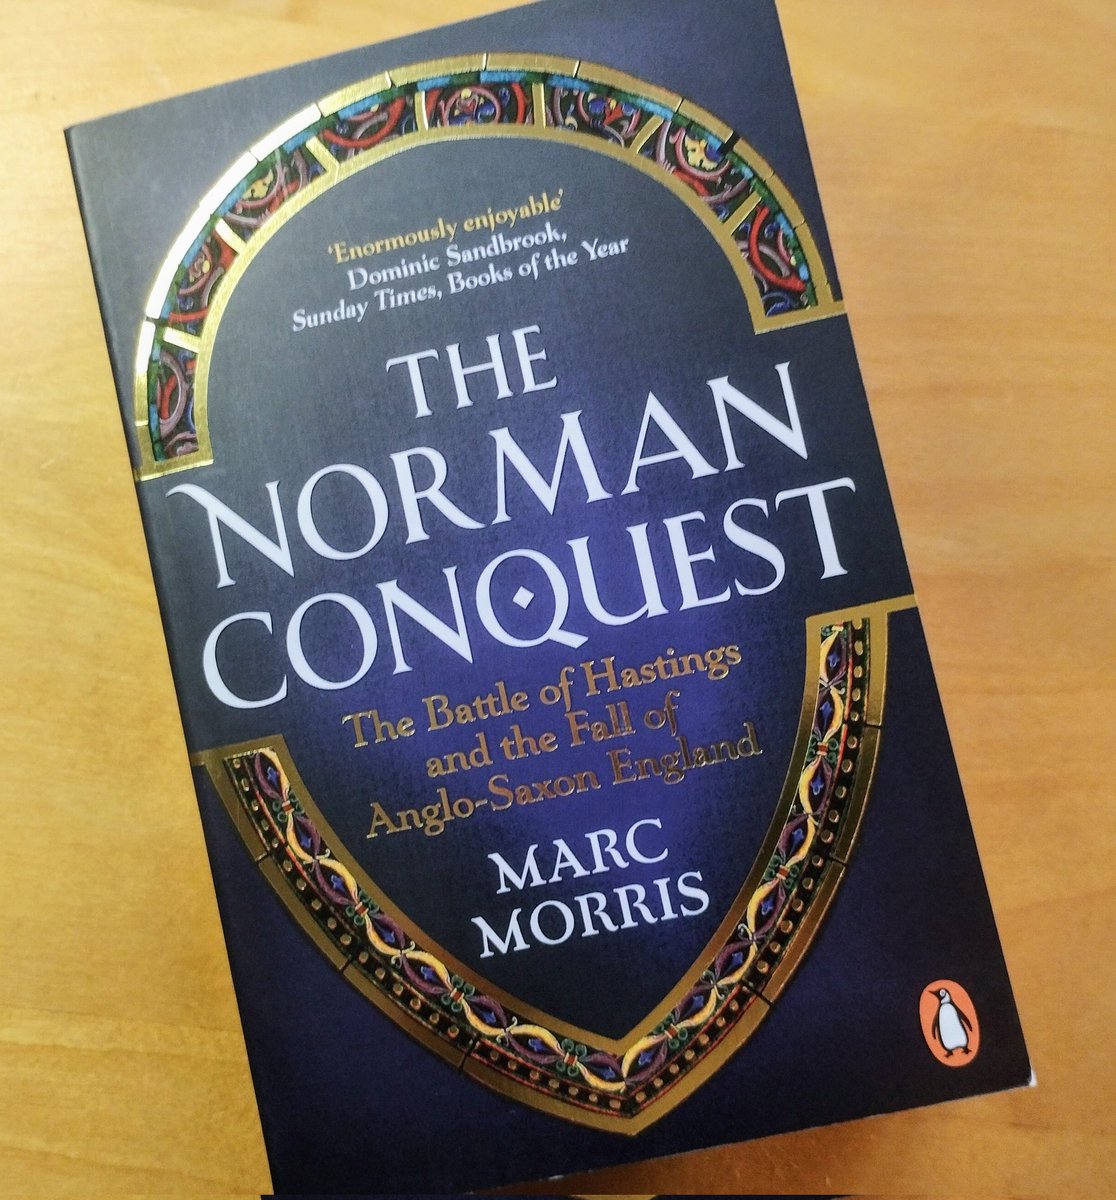 My Norman Conquest book has a shiny new cover design.